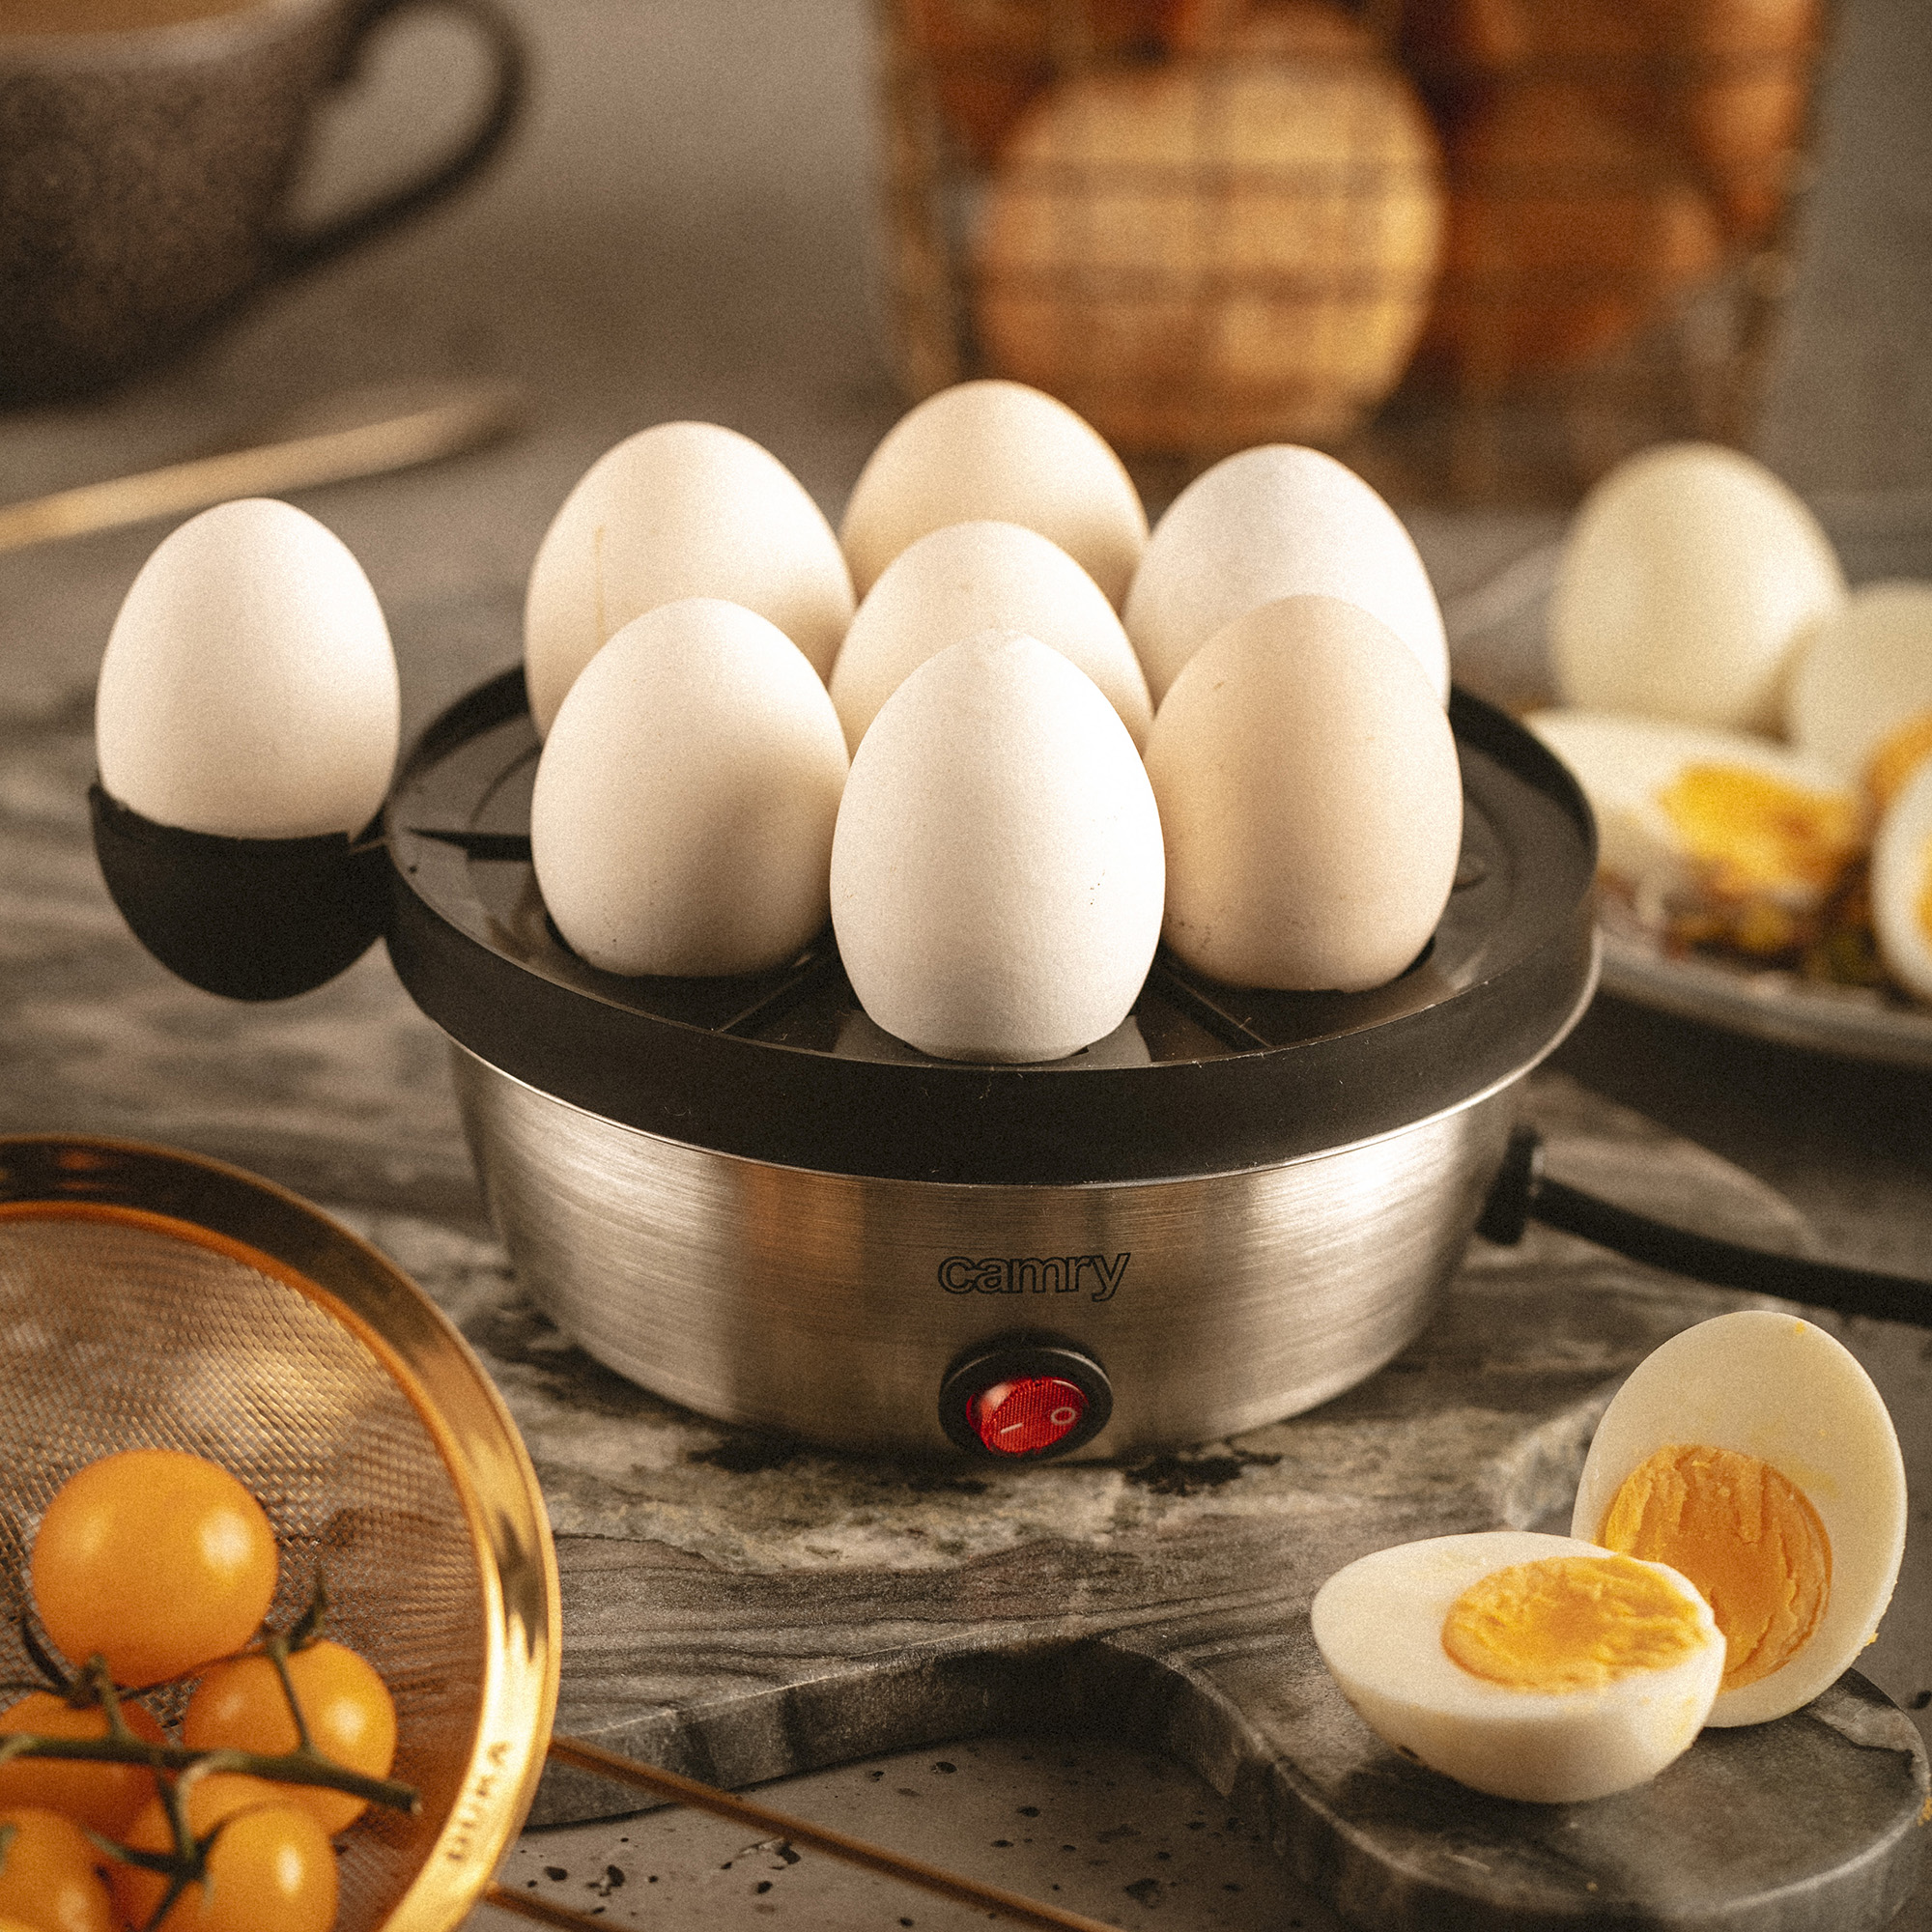 CAMRY CR-4482 Electric Egg Cooker for 7 Eggs, Stainless Steel, Cooking Adjustment, Overheating Protection, 450W, BPA free